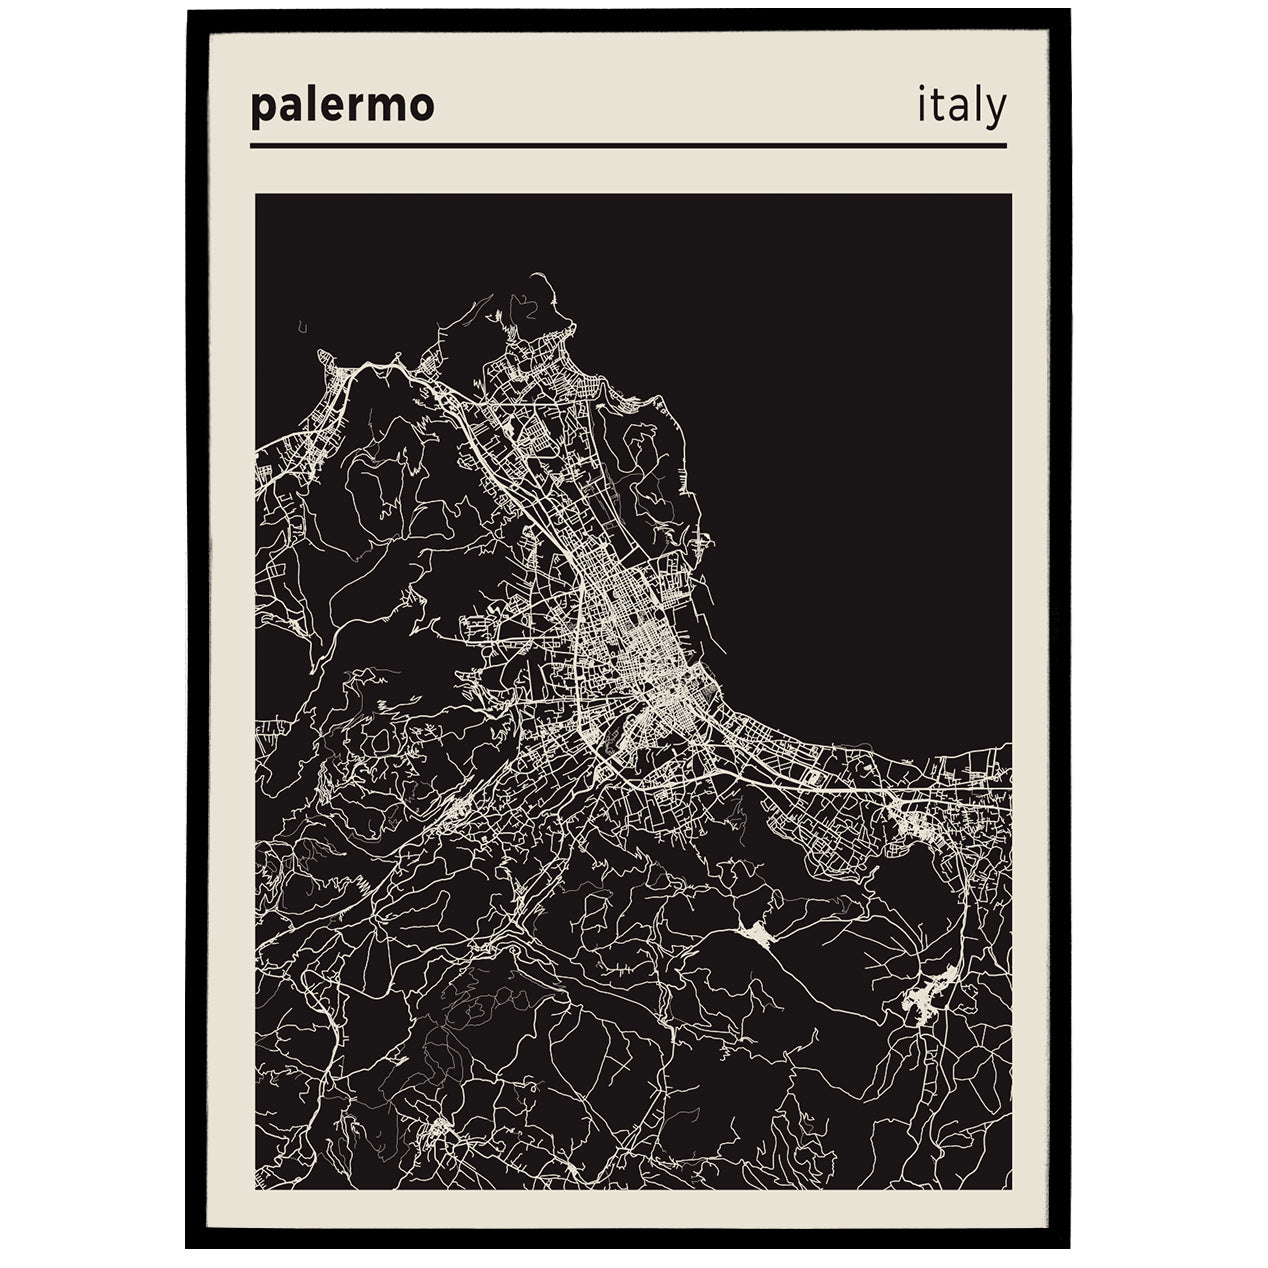 Palermo City Map - Italy - Black and White Poster